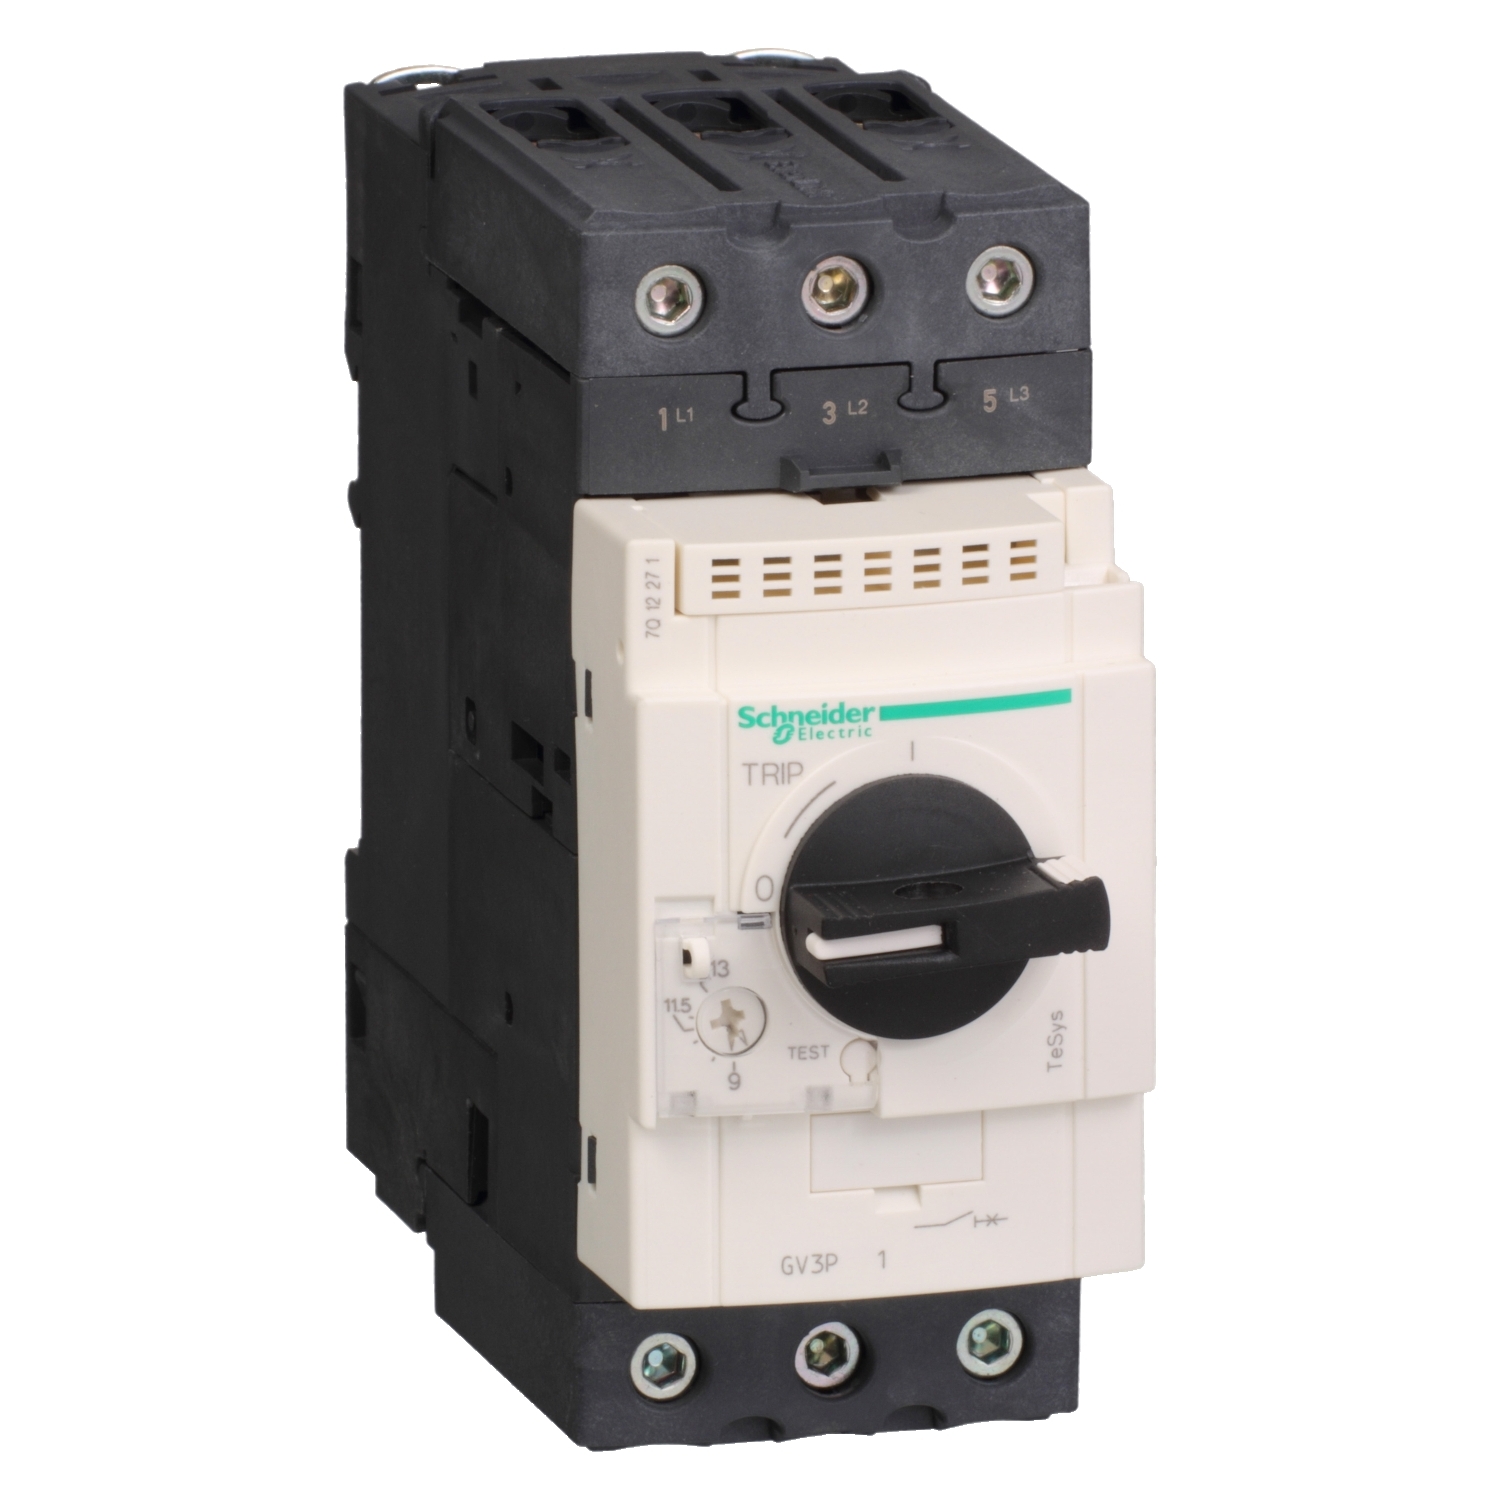 Motor circuit breaker, TeSys Deca, 3P, 17 to 25A, thermal magnetic, EverLink terminals